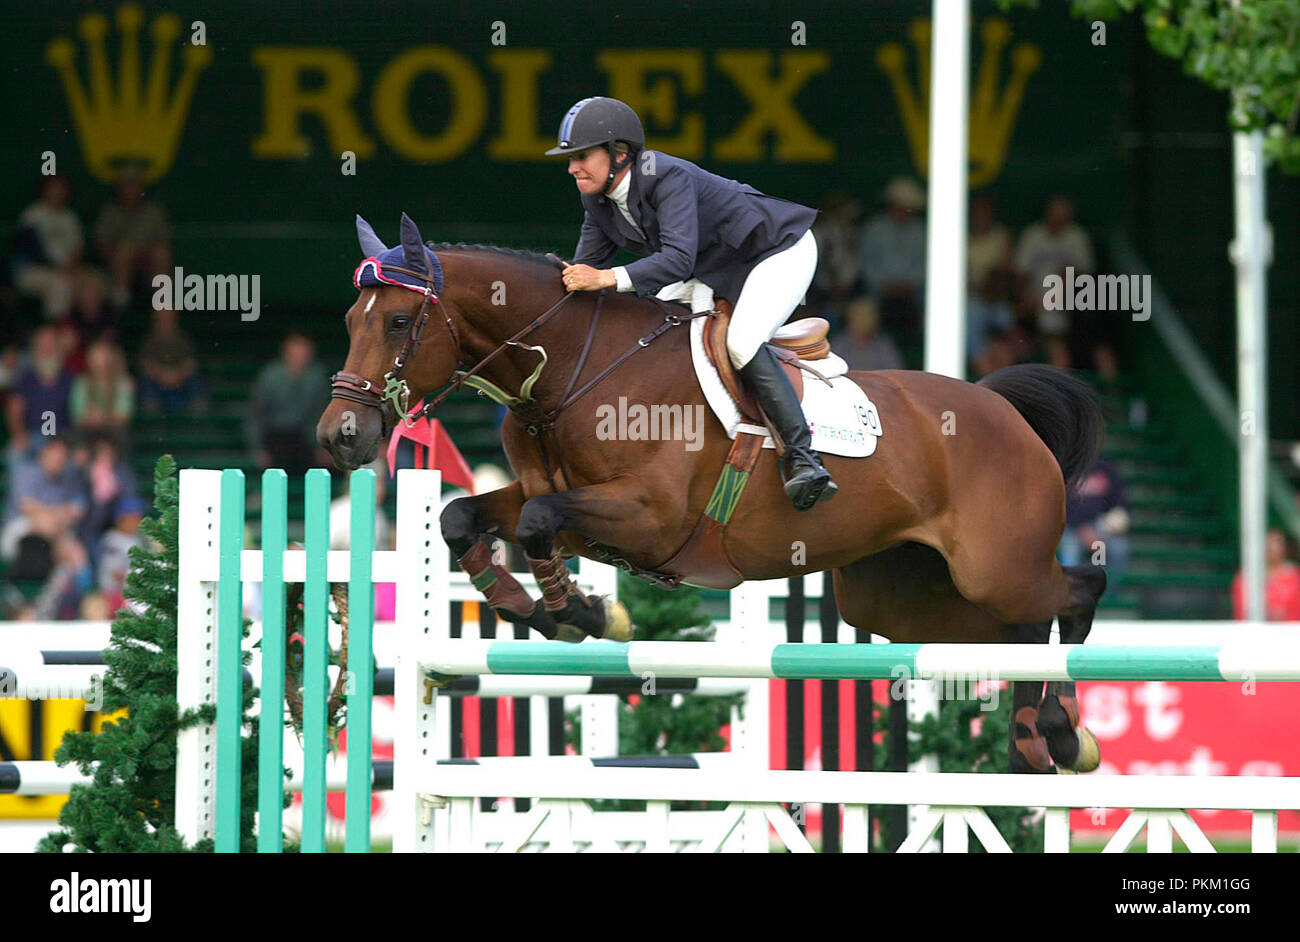 The North American Spruce Meadows 2003, Great-West Life Cup, Laura Kraut (USA) riding Liberty Stock Photo